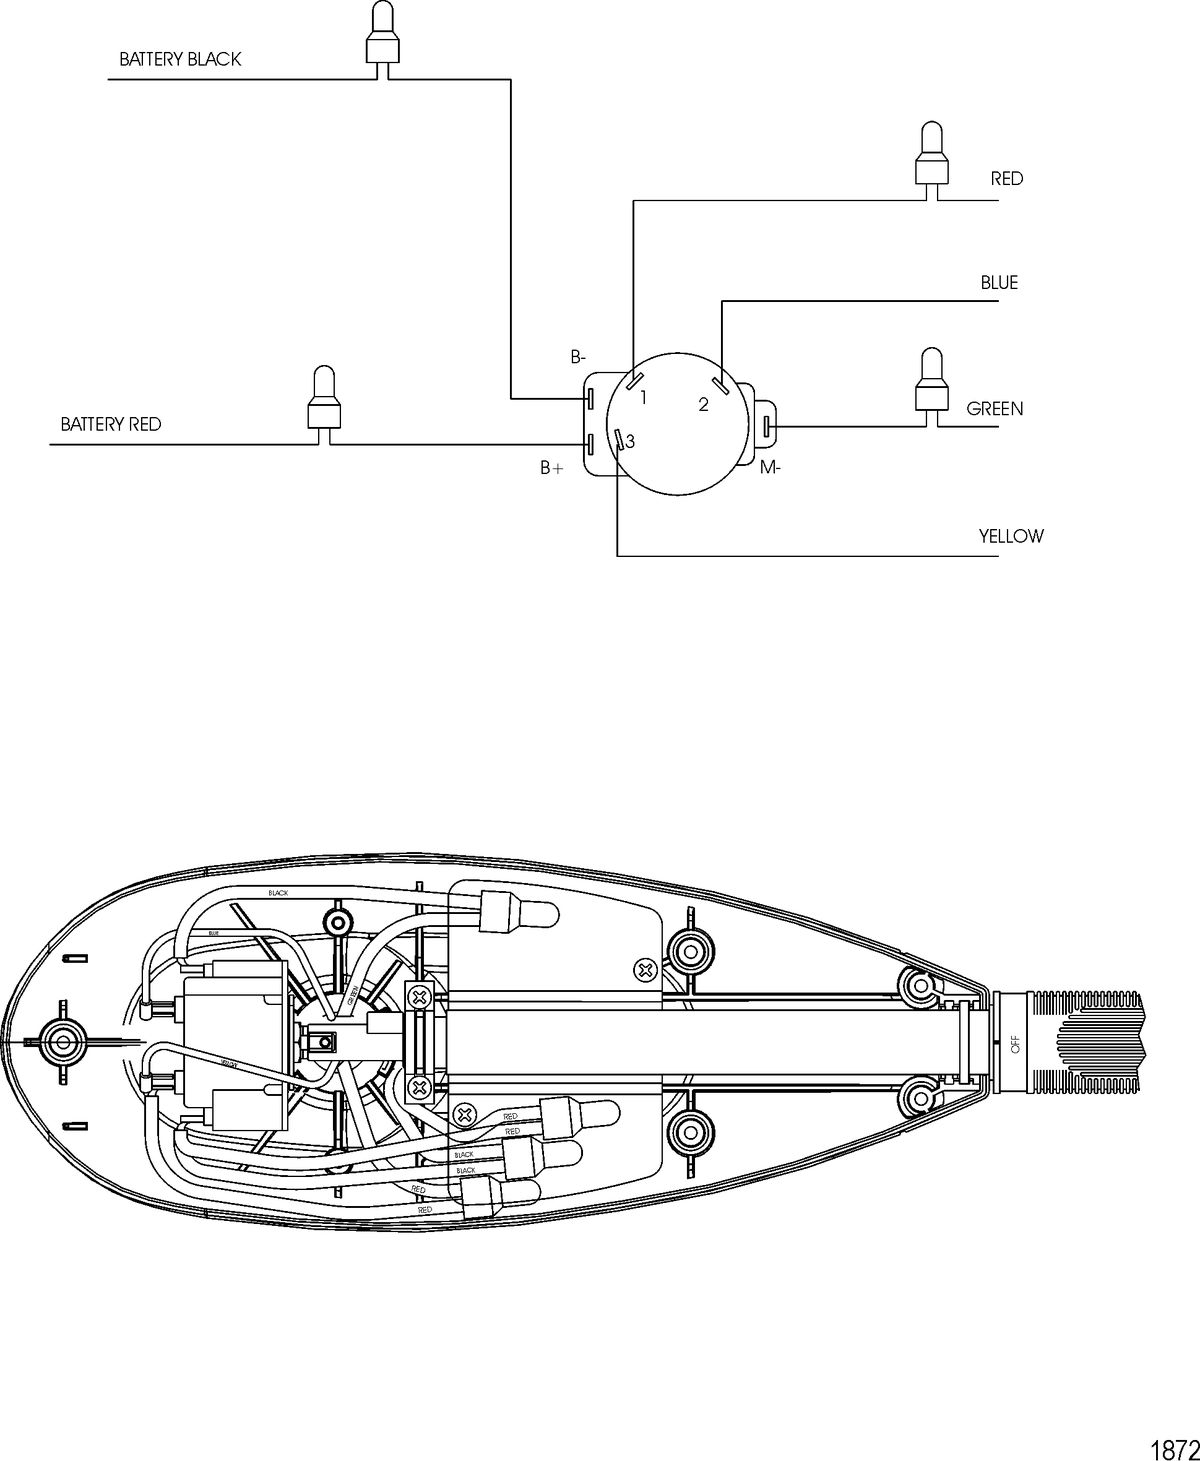 TROLLING MOTOR MOTORGUIDE SALT WATER SERIES Wire Diagram(Model SW71HB) (Without Quick Connect)